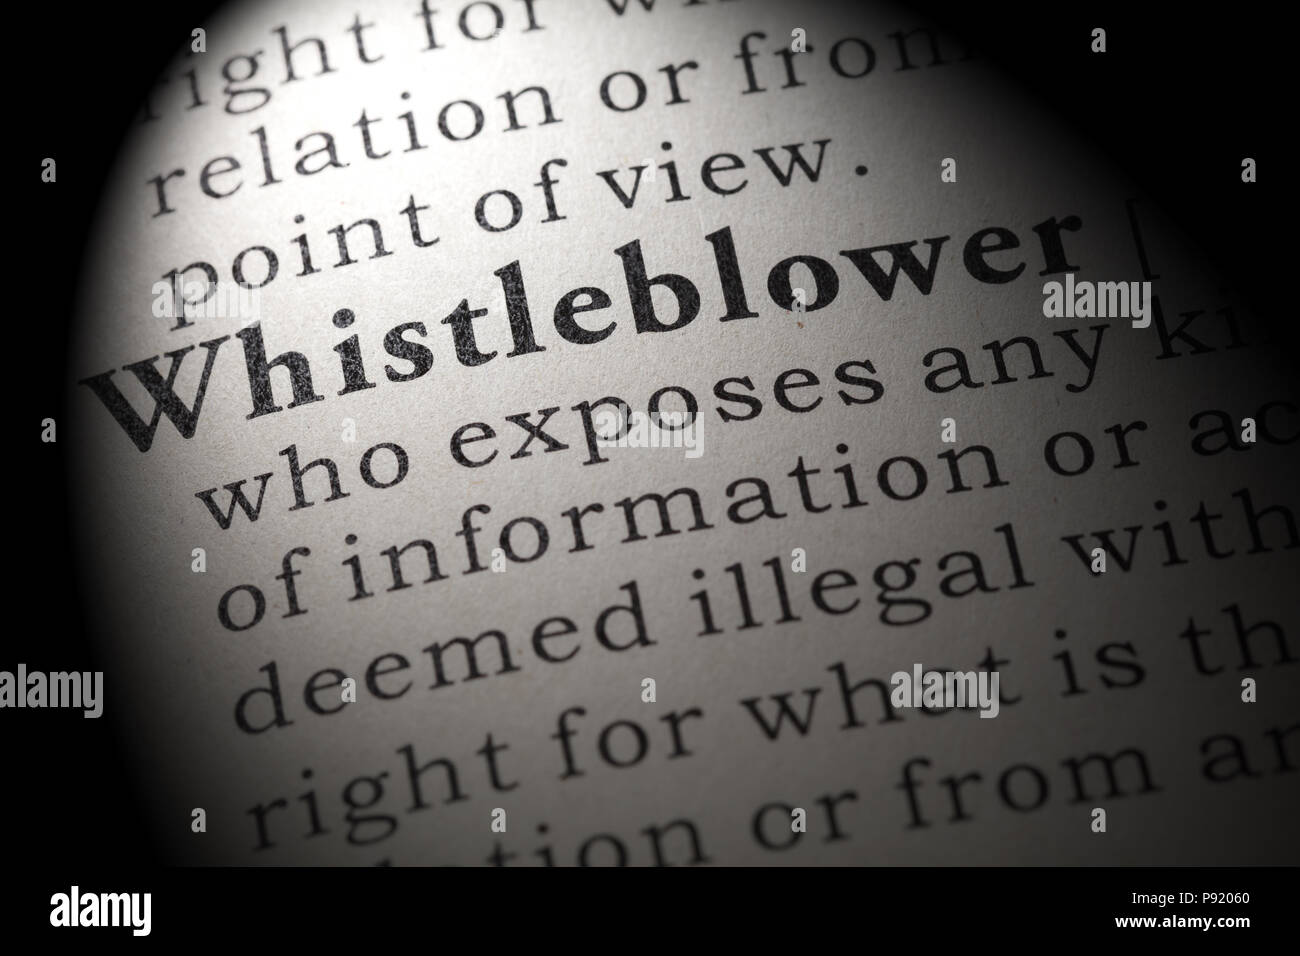 Fake Dictionary, Dictionary definition of the word whistleblower. including key descriptive words. Stock Photo